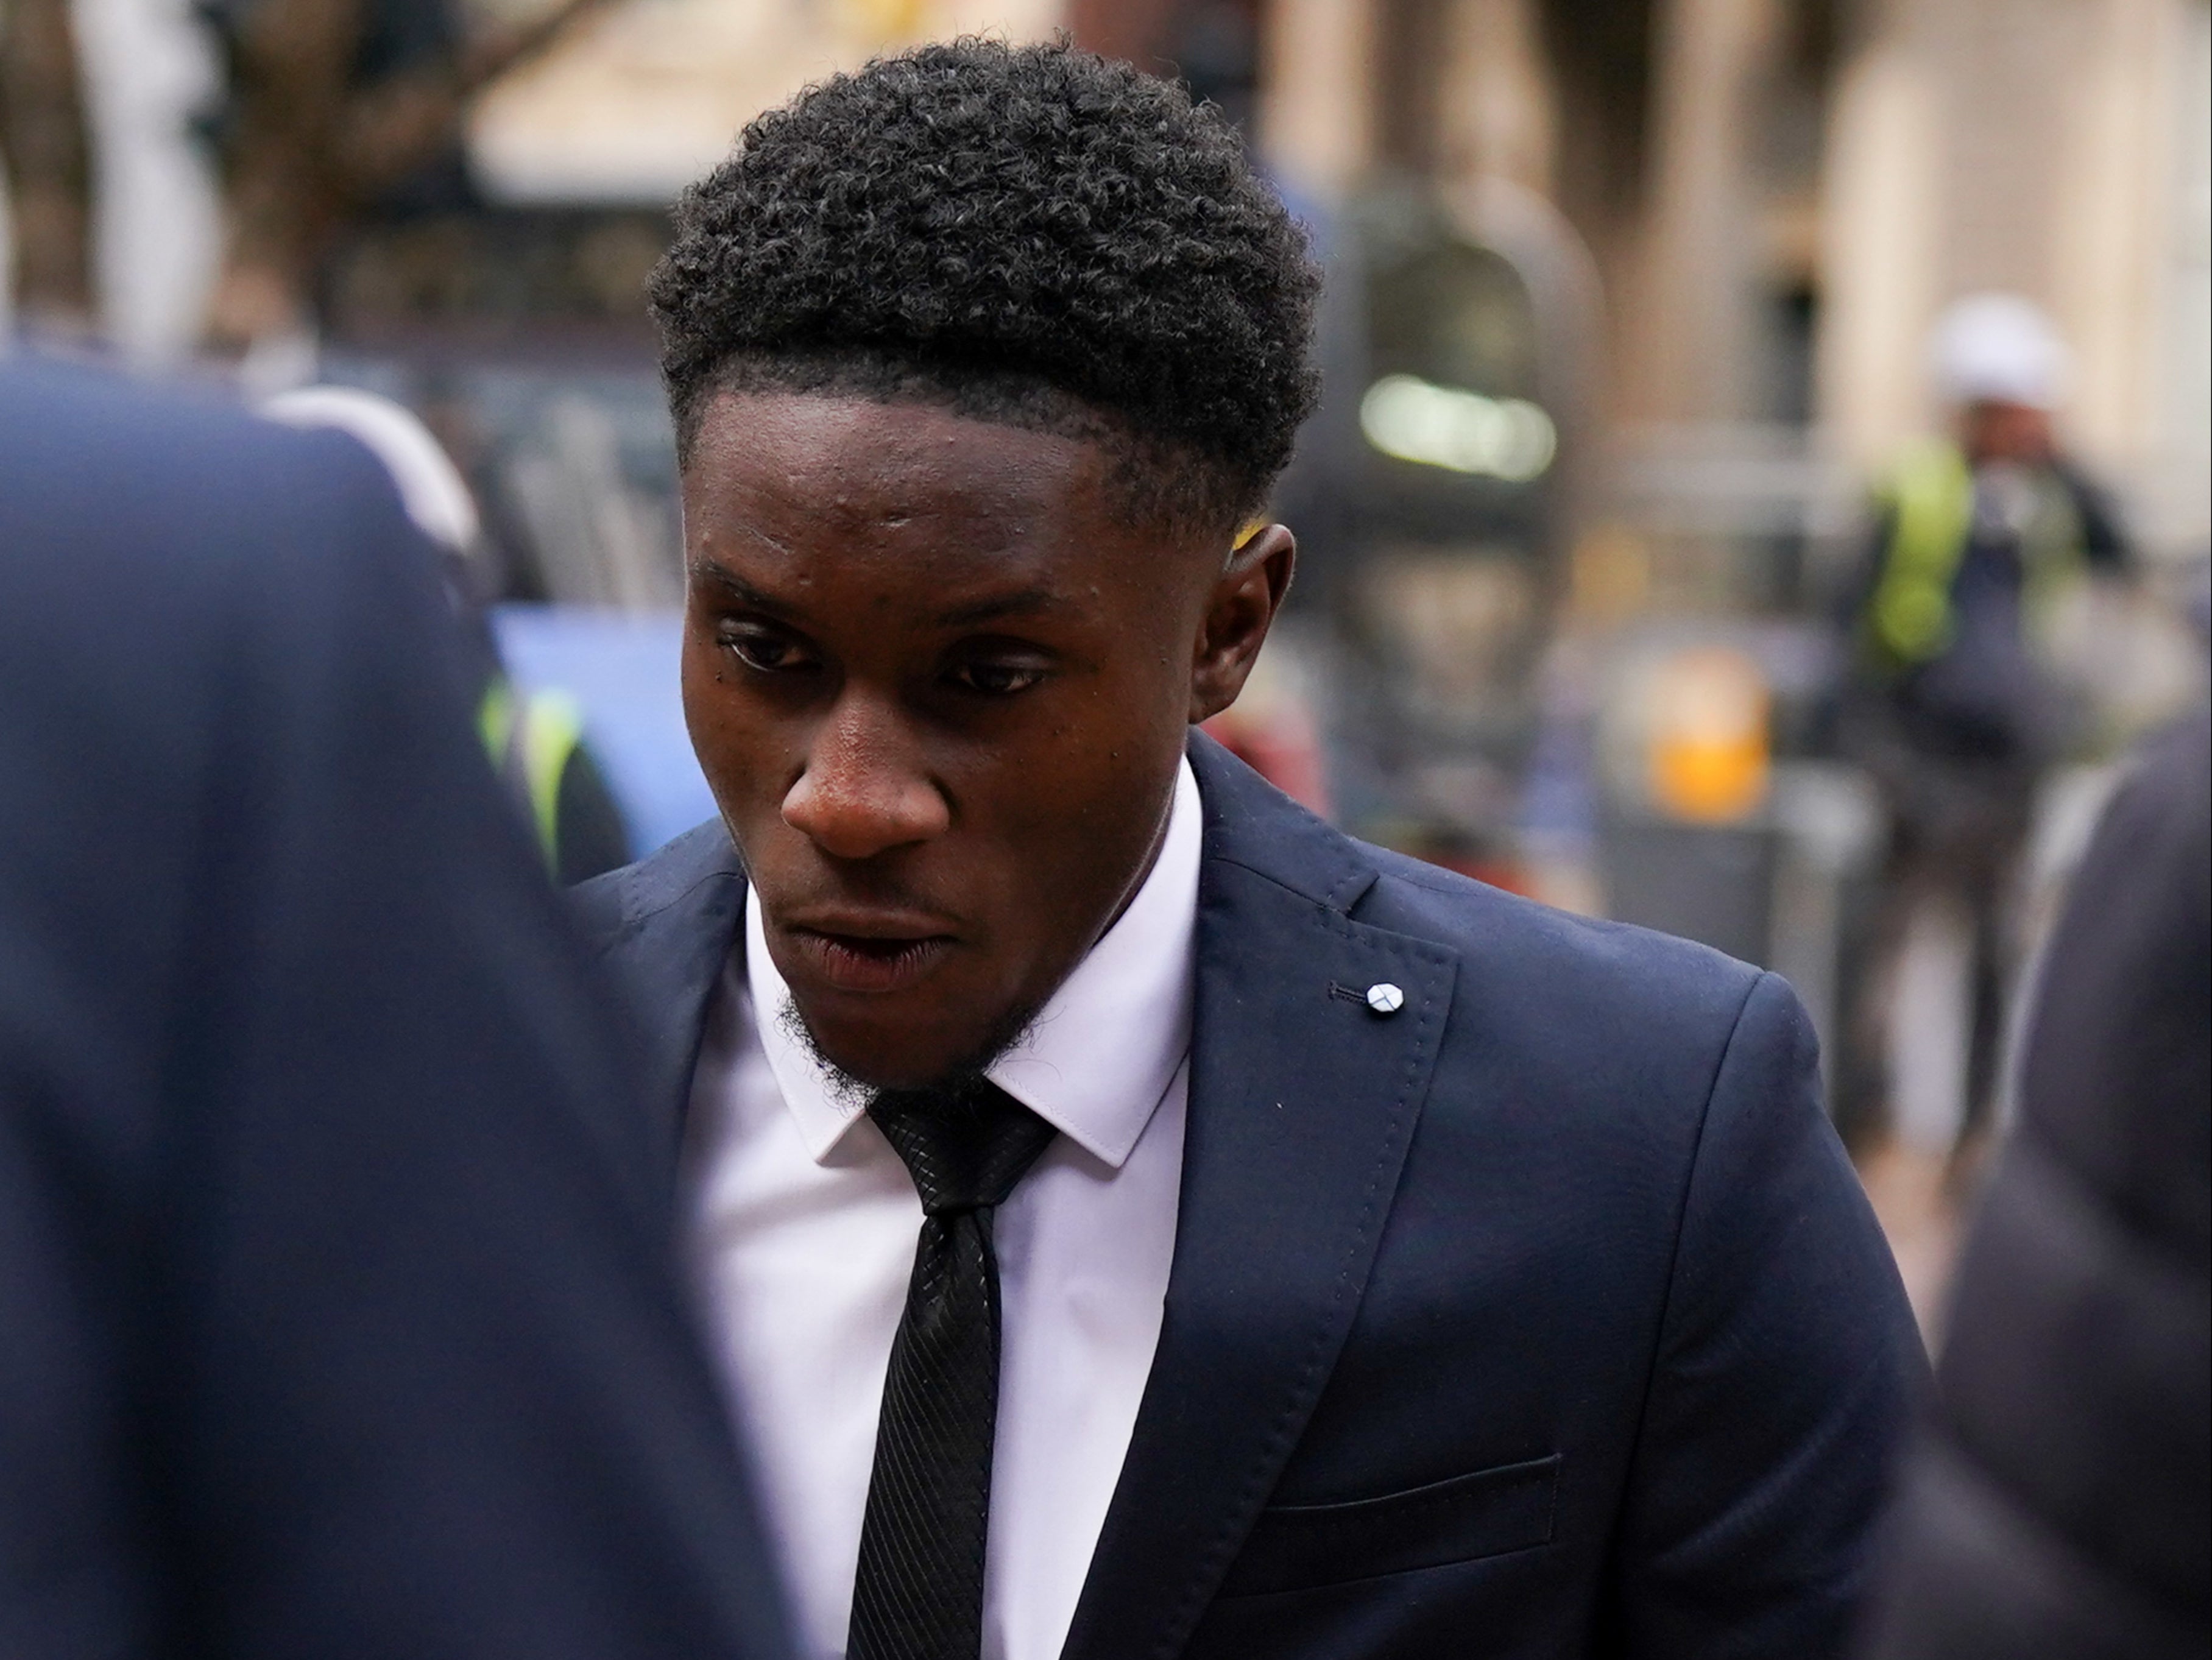 Burton Albion defender Williams Kokolo has appeared in court to deny three charges of rape